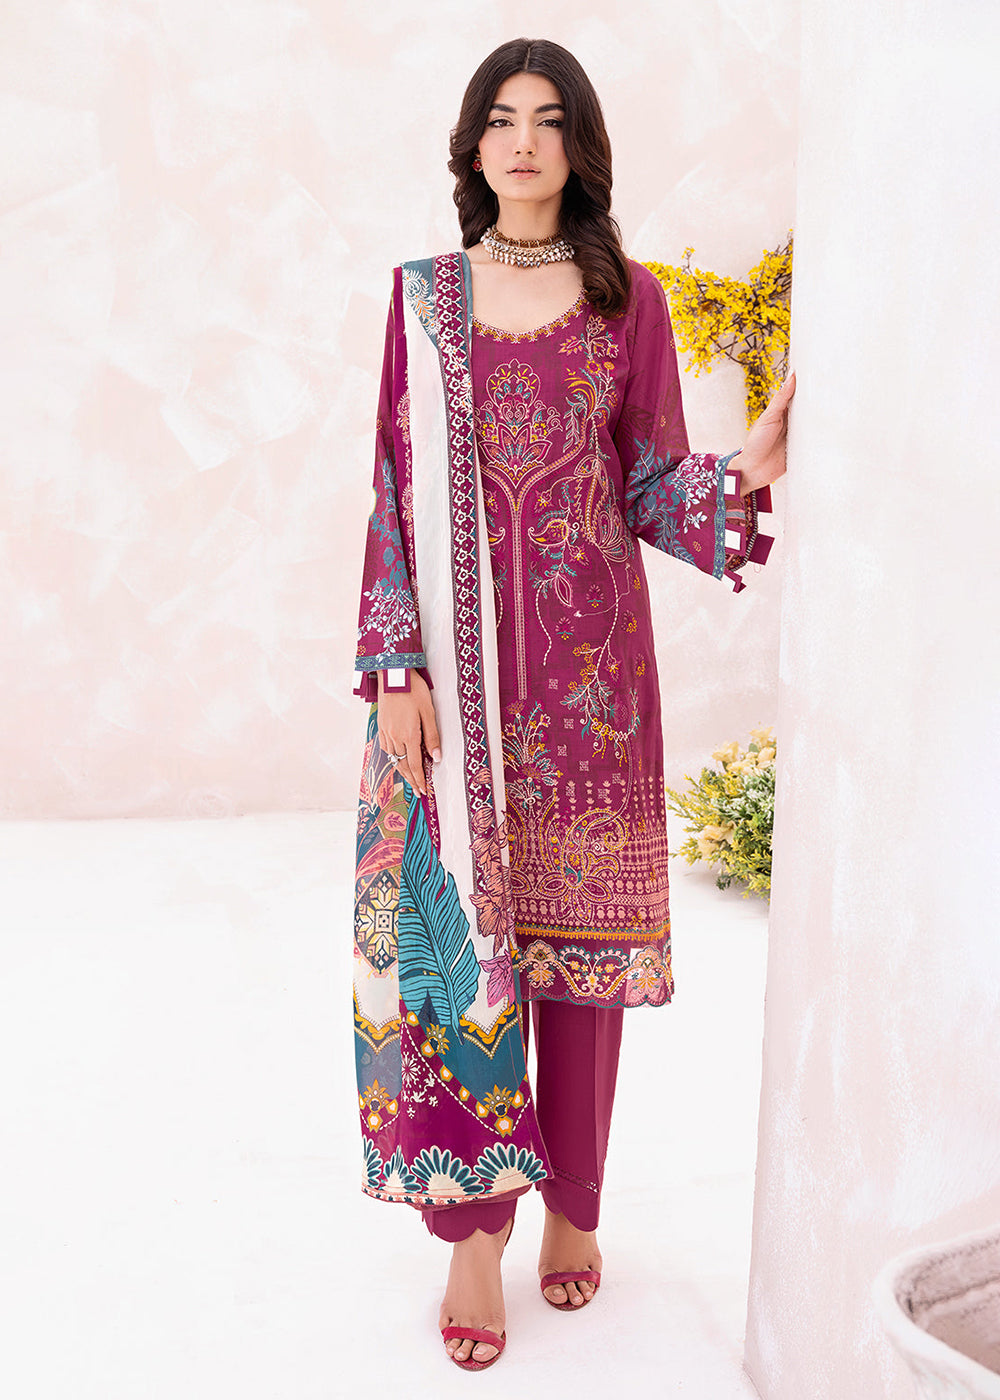 Buy Now Pink Pakistani Salwar Suit - Ramsha Mashaal Collection Vol 7 - #L-709 Online in USA, UK, Canada & Worldwide at Empress Clothing.